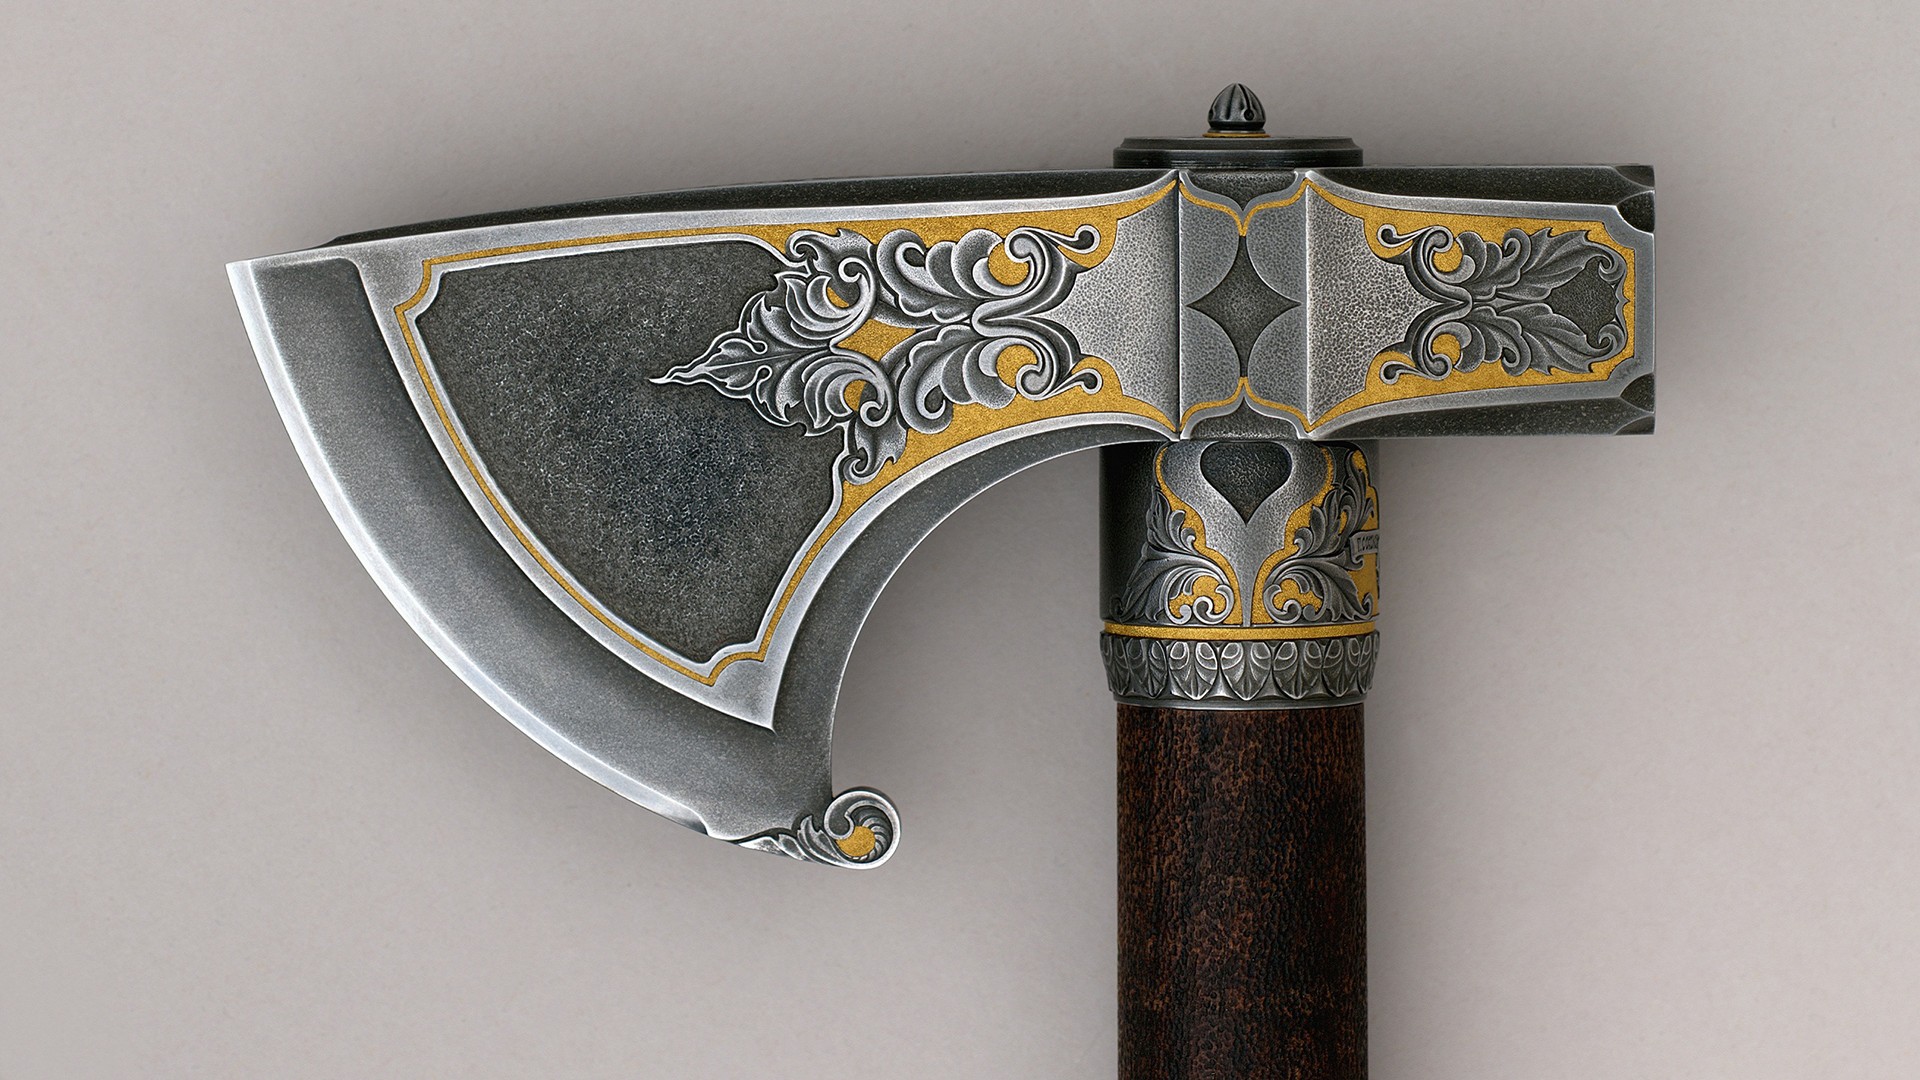 Weapons Battle Axe HD Wallpaper | Background Image